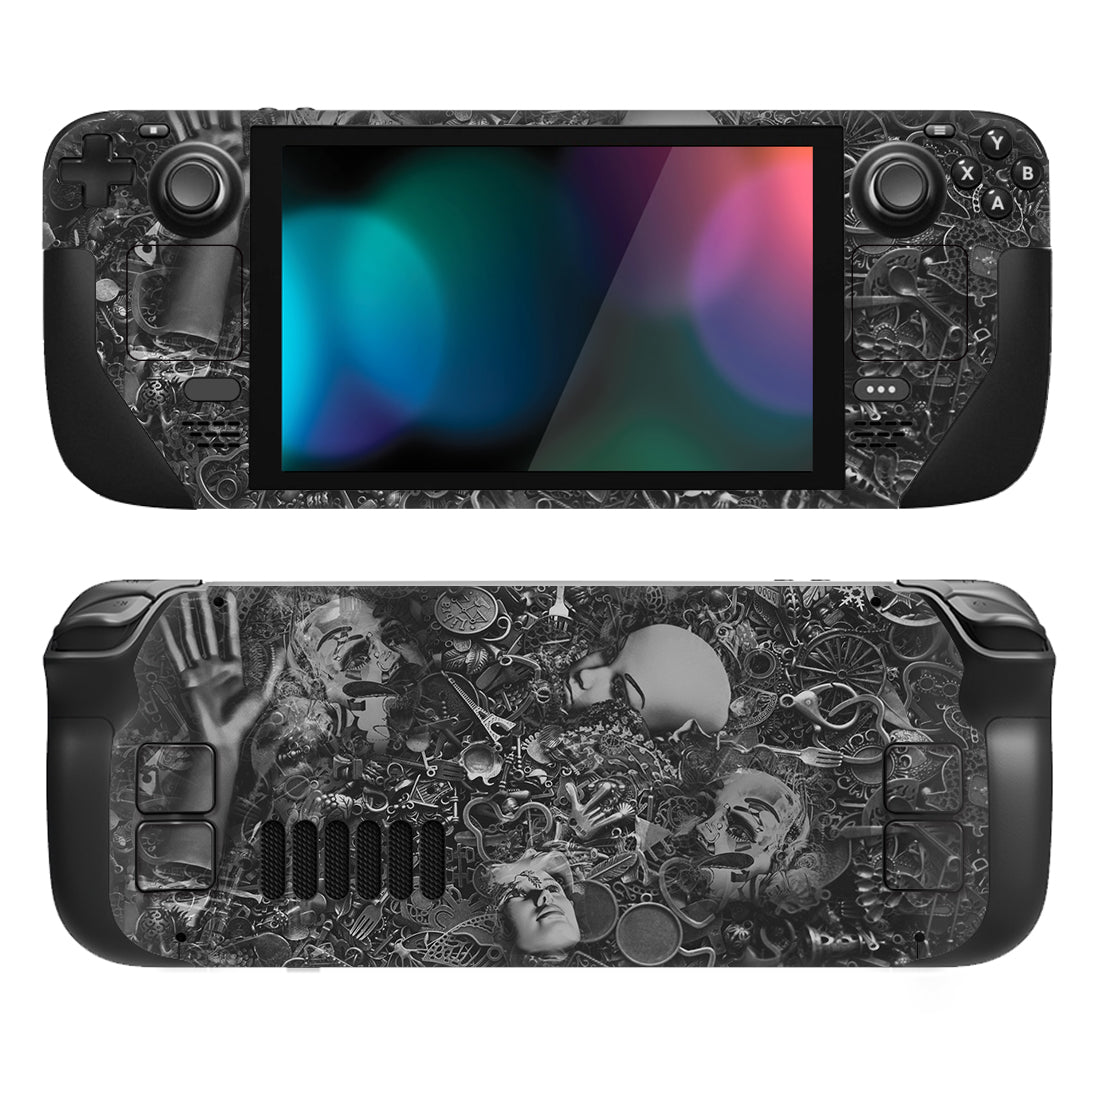 PlayVital Full Set Protective Skin Decal for Steam Deck, Custom Stickers Vinyl Cover for Steam Deck Handheld Gaming PC - Cyborg Wreck - SDTM045 PlayVital